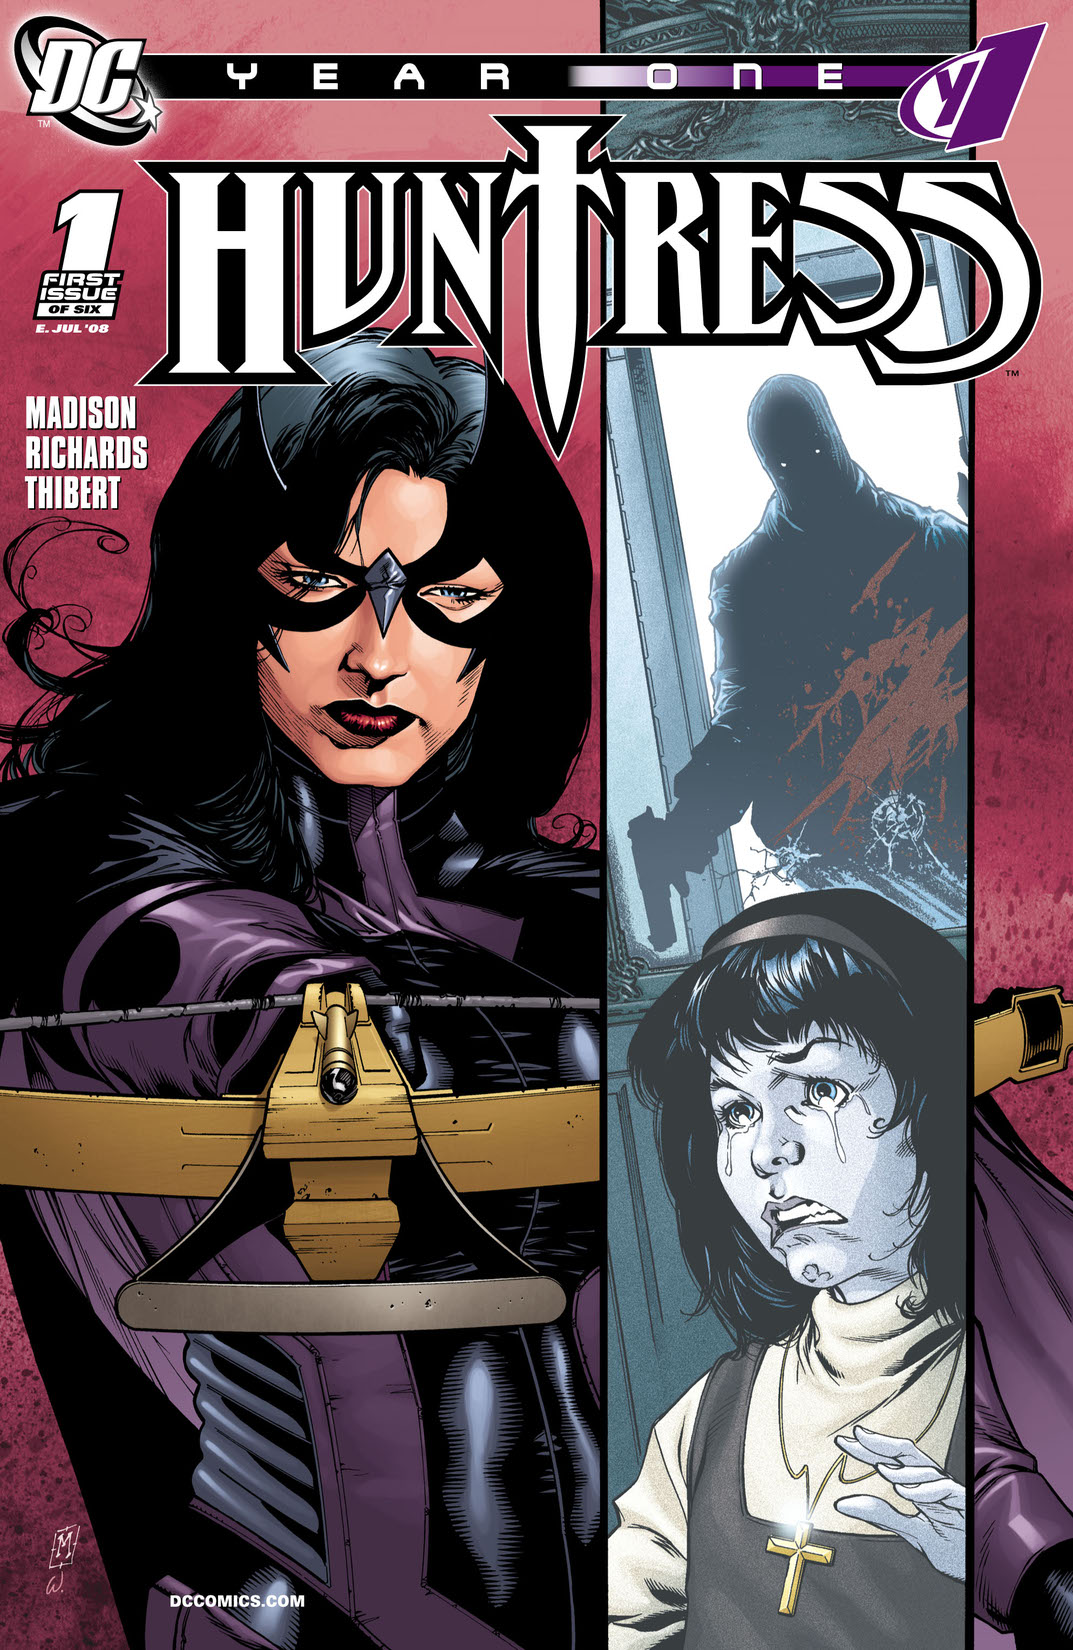 Huntress: Year One #1 preview images